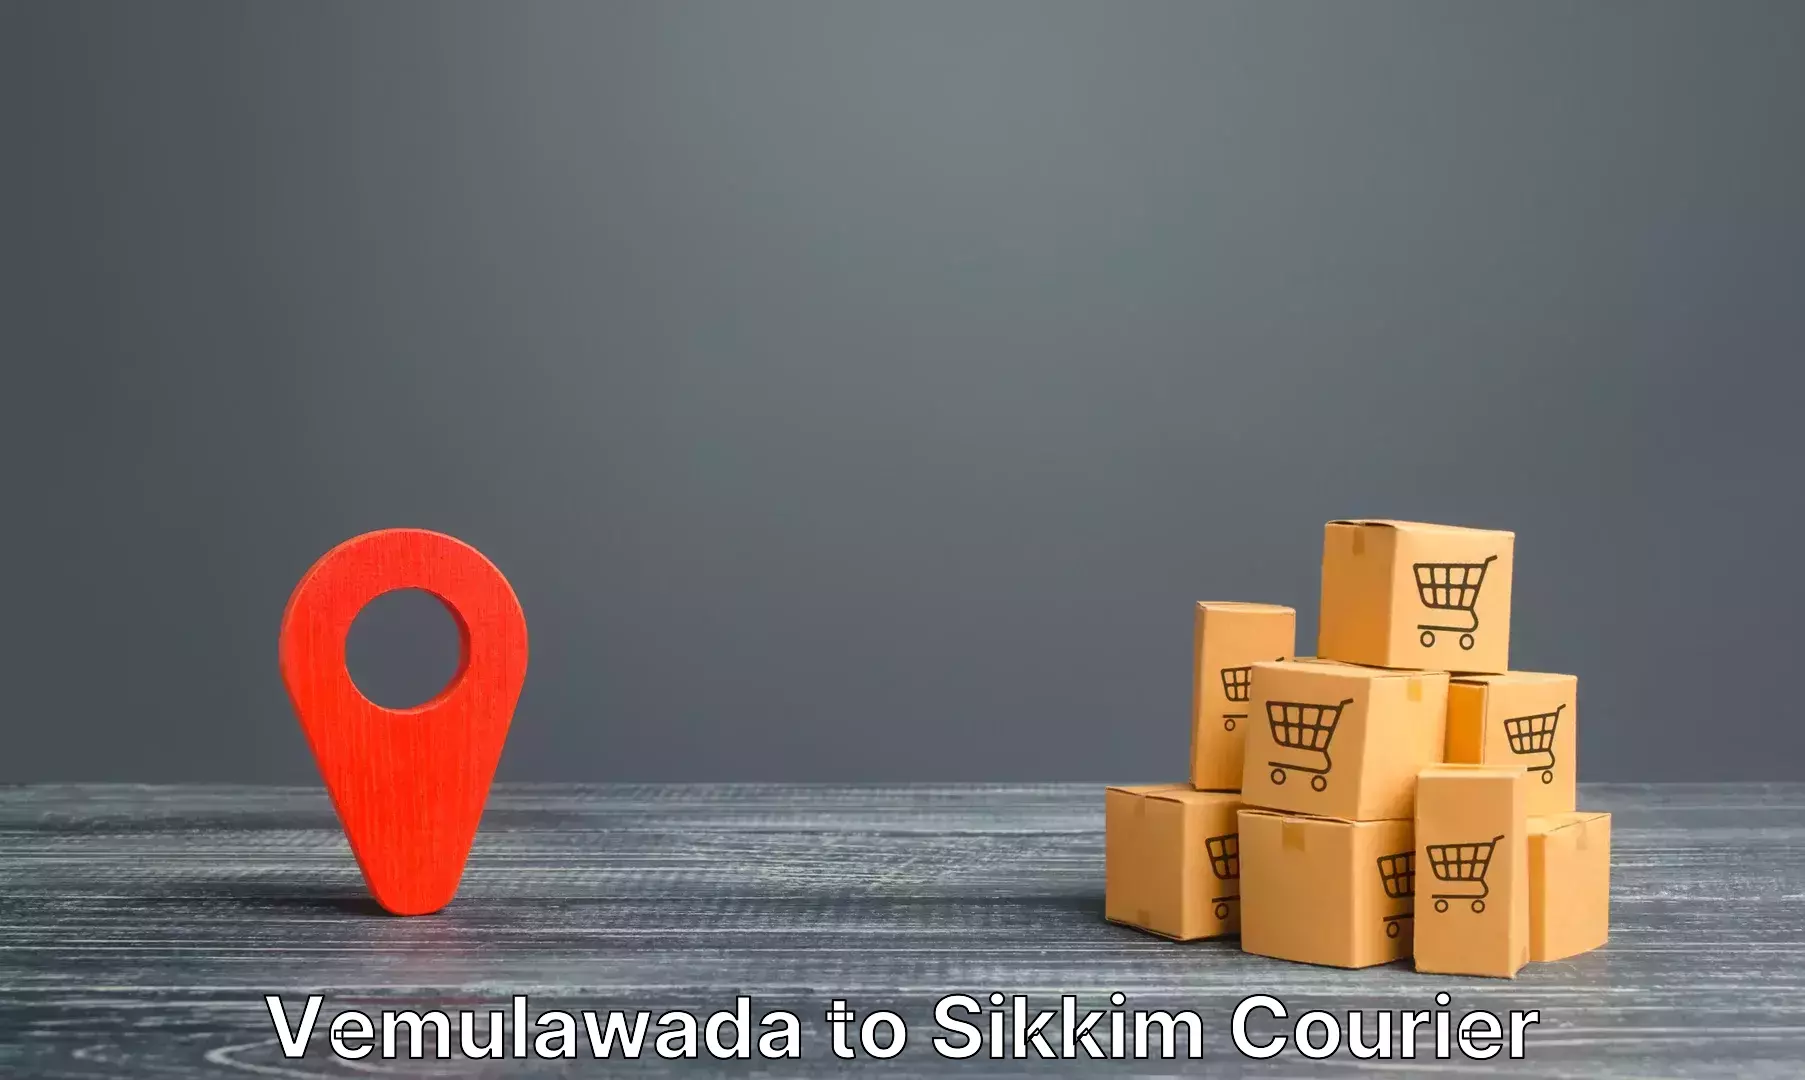 Luggage shipment specialists Vemulawada to South Sikkim